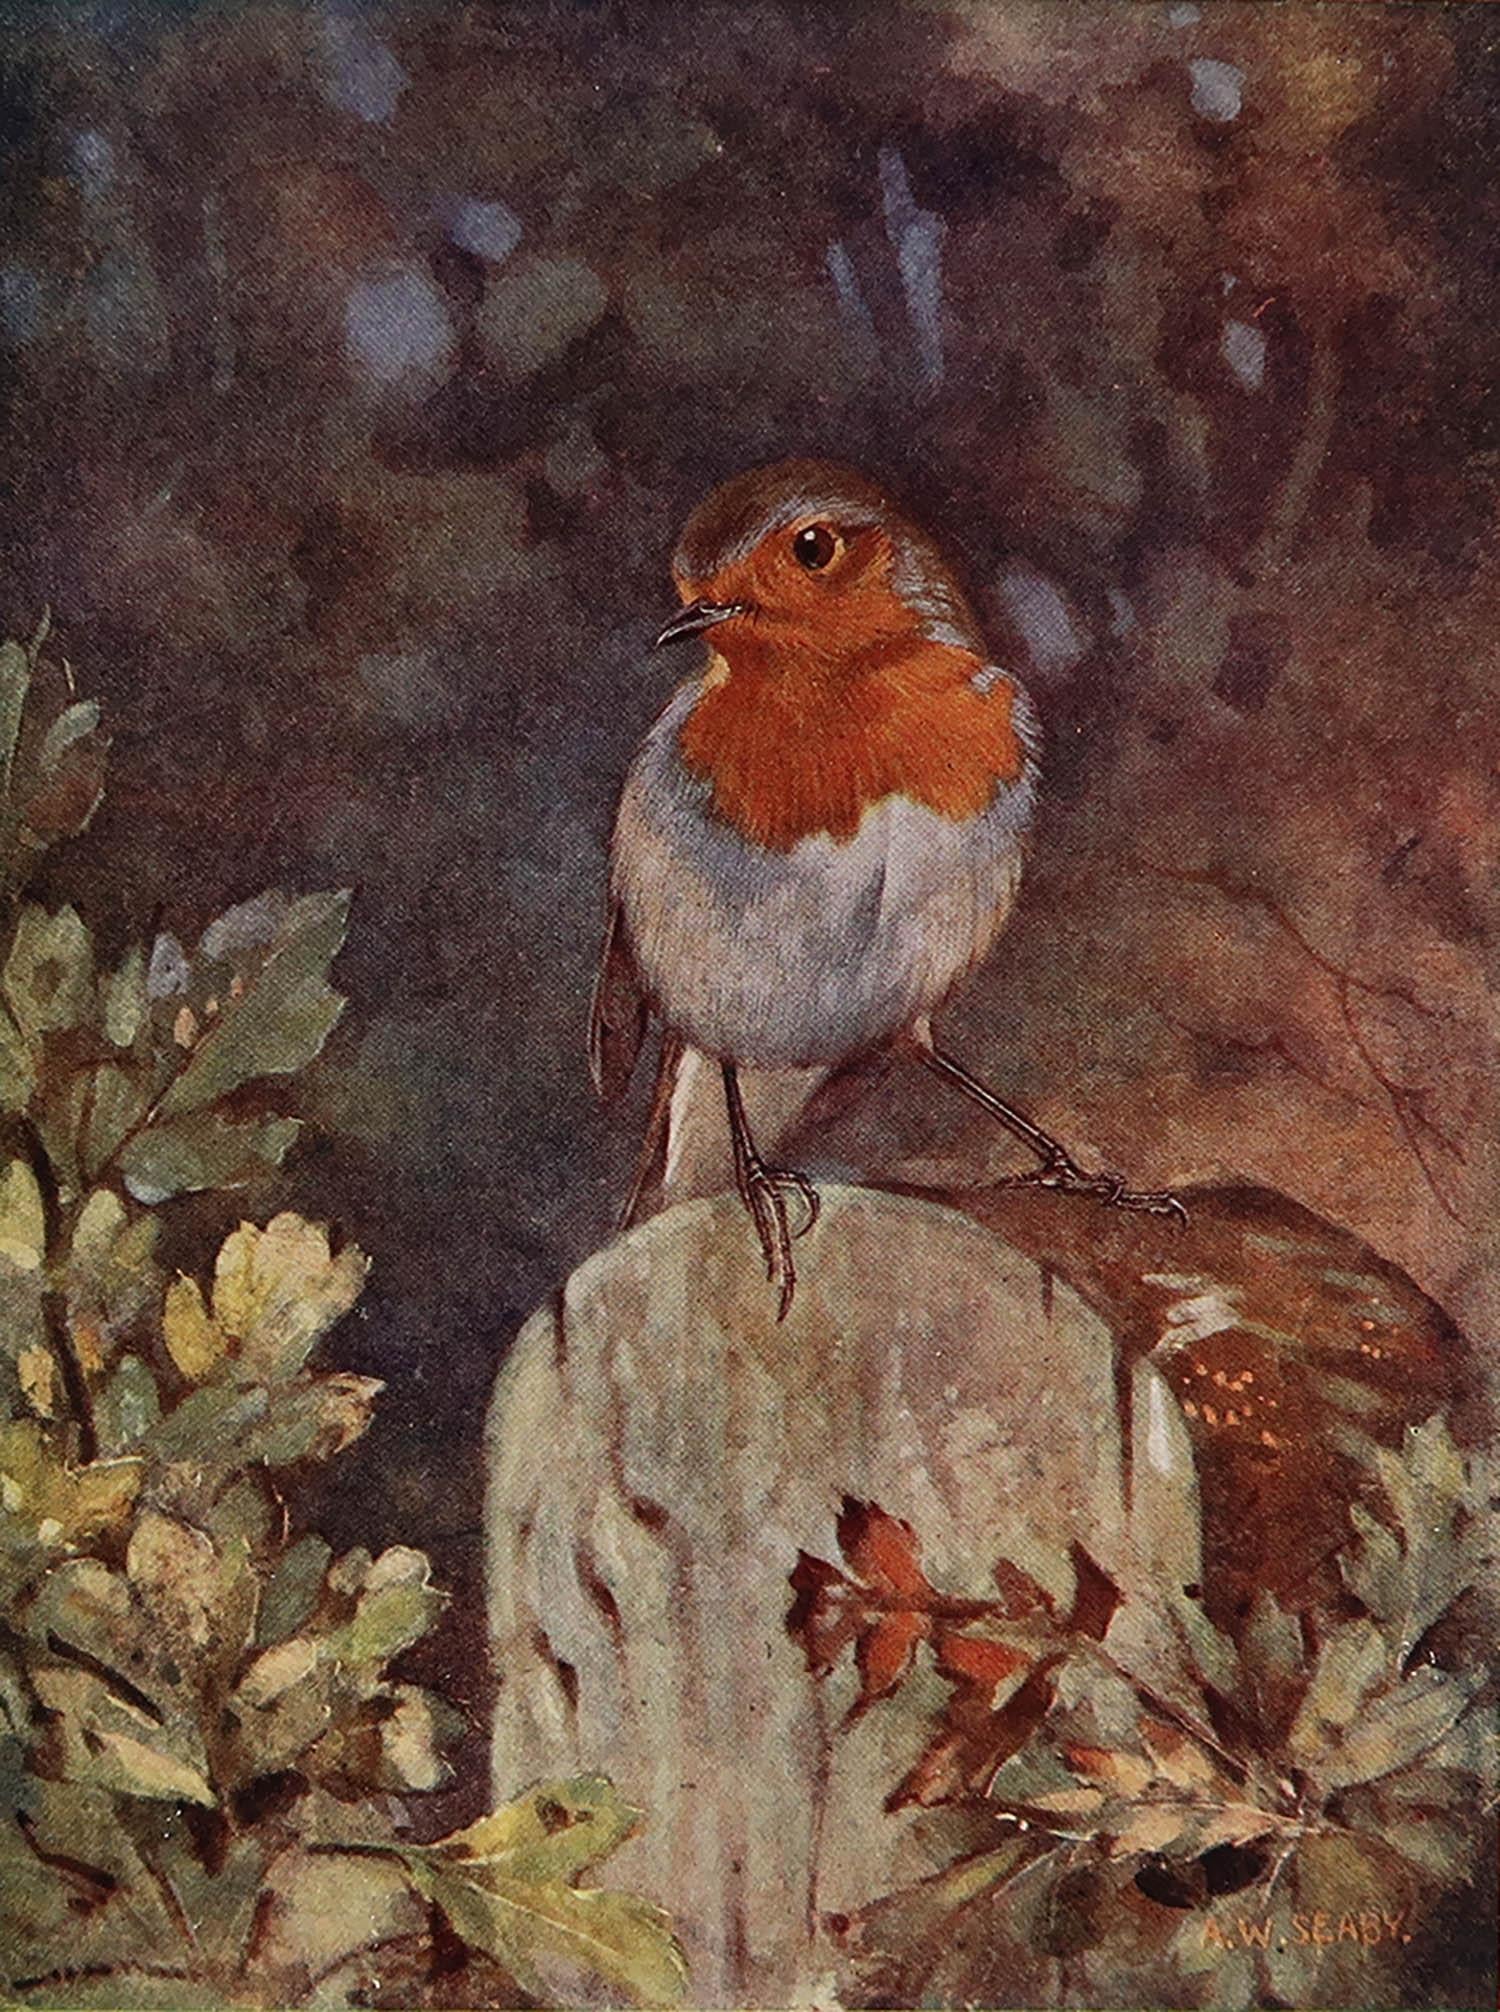 Great image of a robin

Unframed. It gives you the option of perhaps making a set up using your own choice of frames.

Published, circa 1910

The measurement given is the paper size






